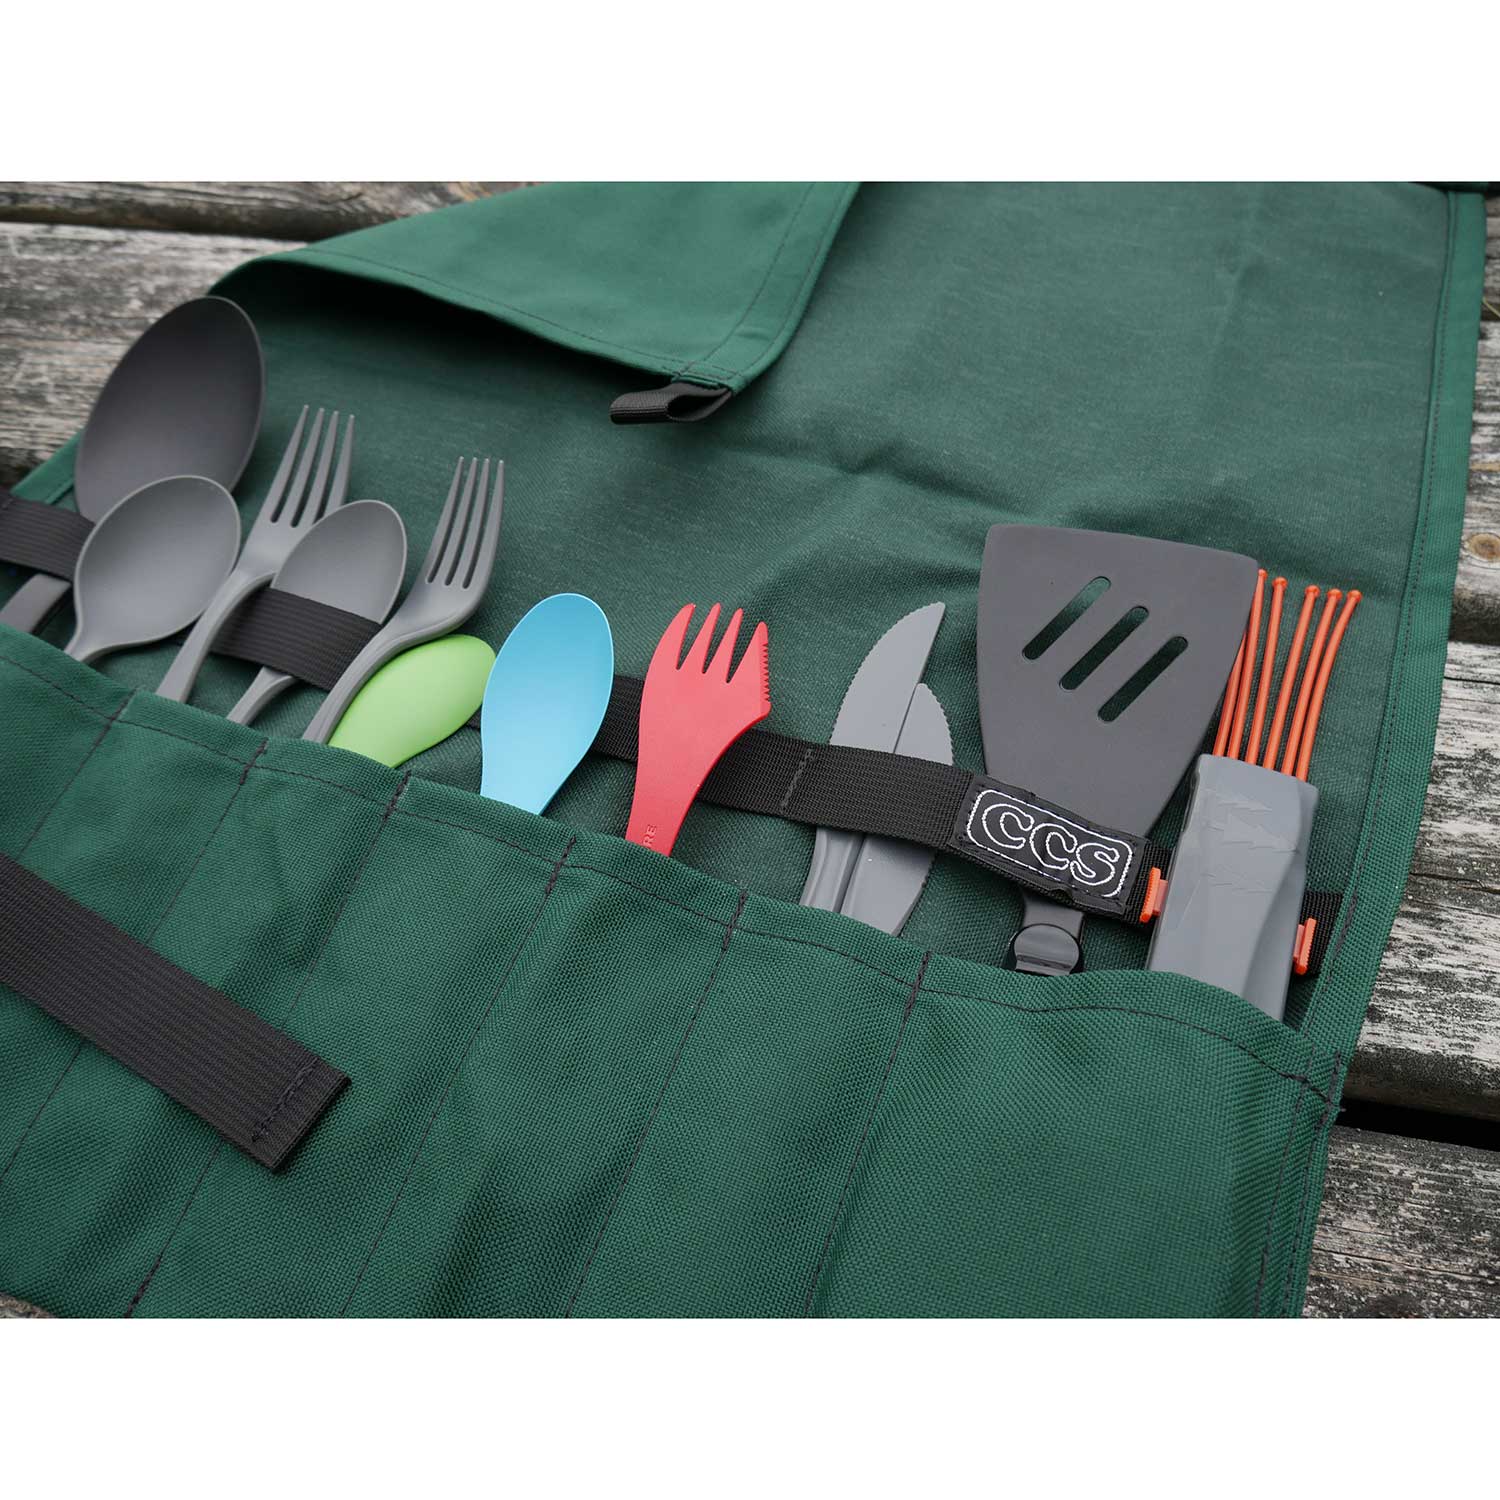 Utensil Roll Up By Ccs, Camp Kitchen Organizer : Boundary Waters Piragis